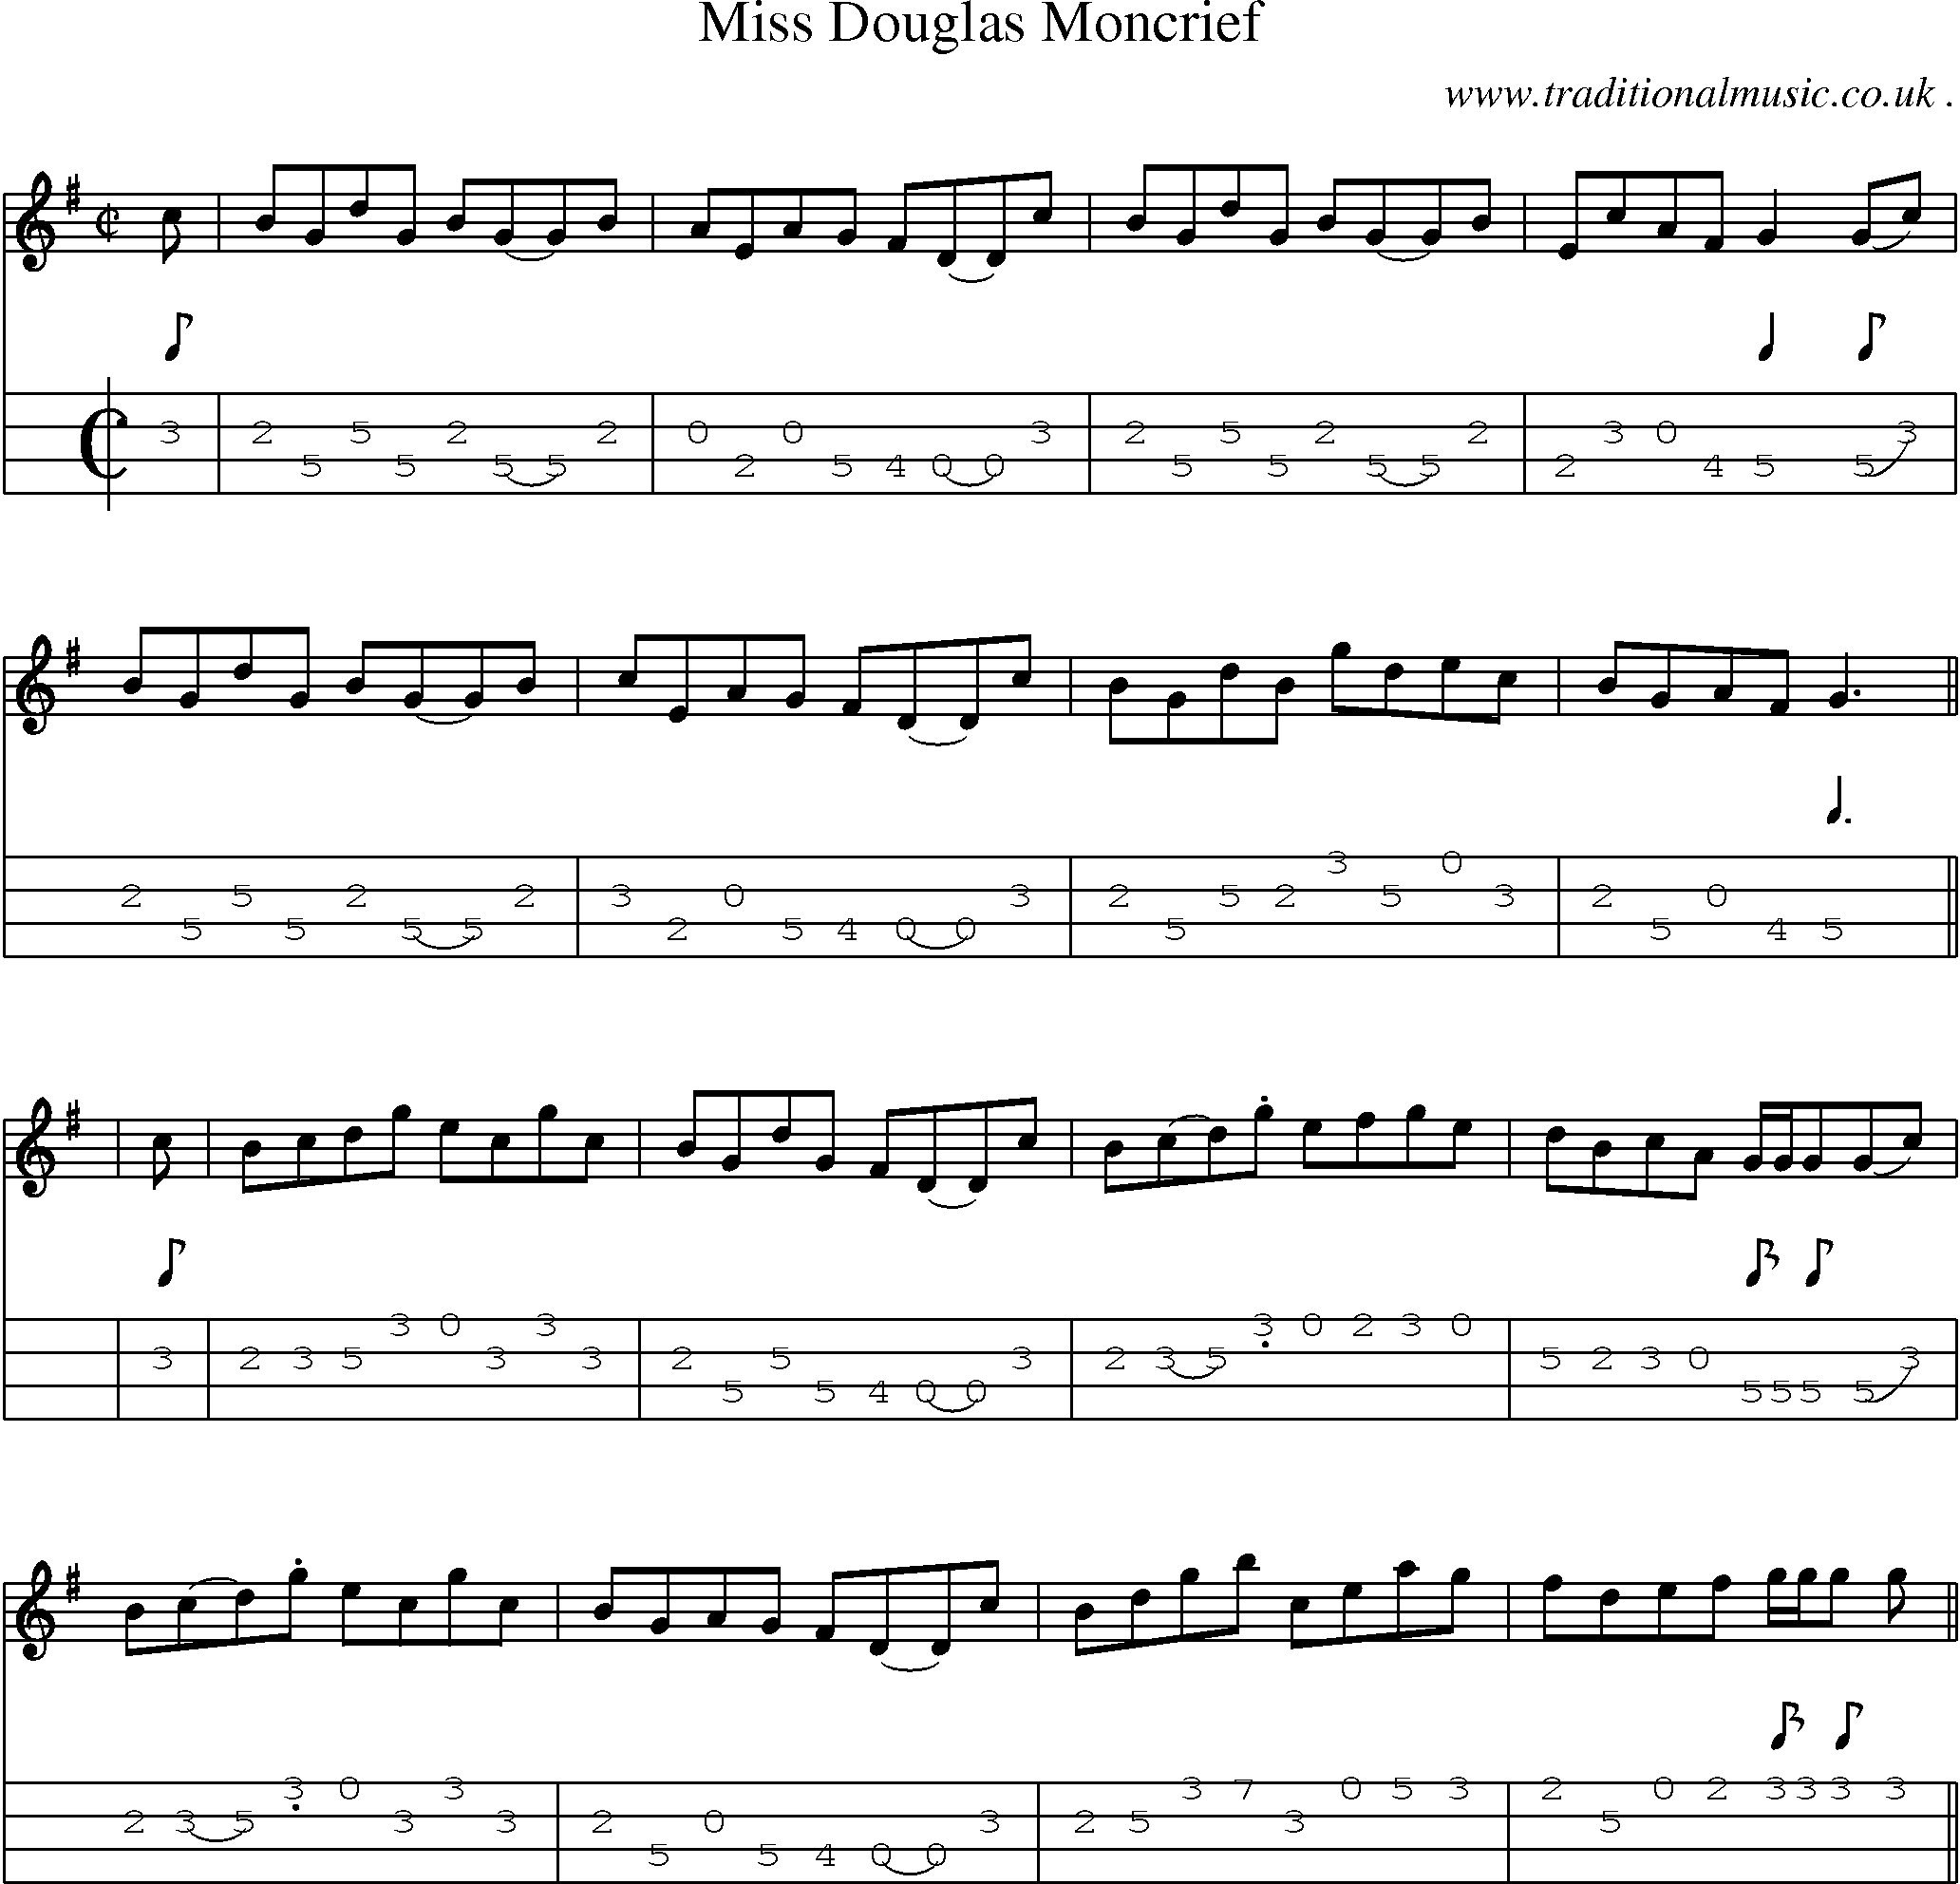 Sheet-Music and Mandolin Tabs for Miss Douglas Moncrief